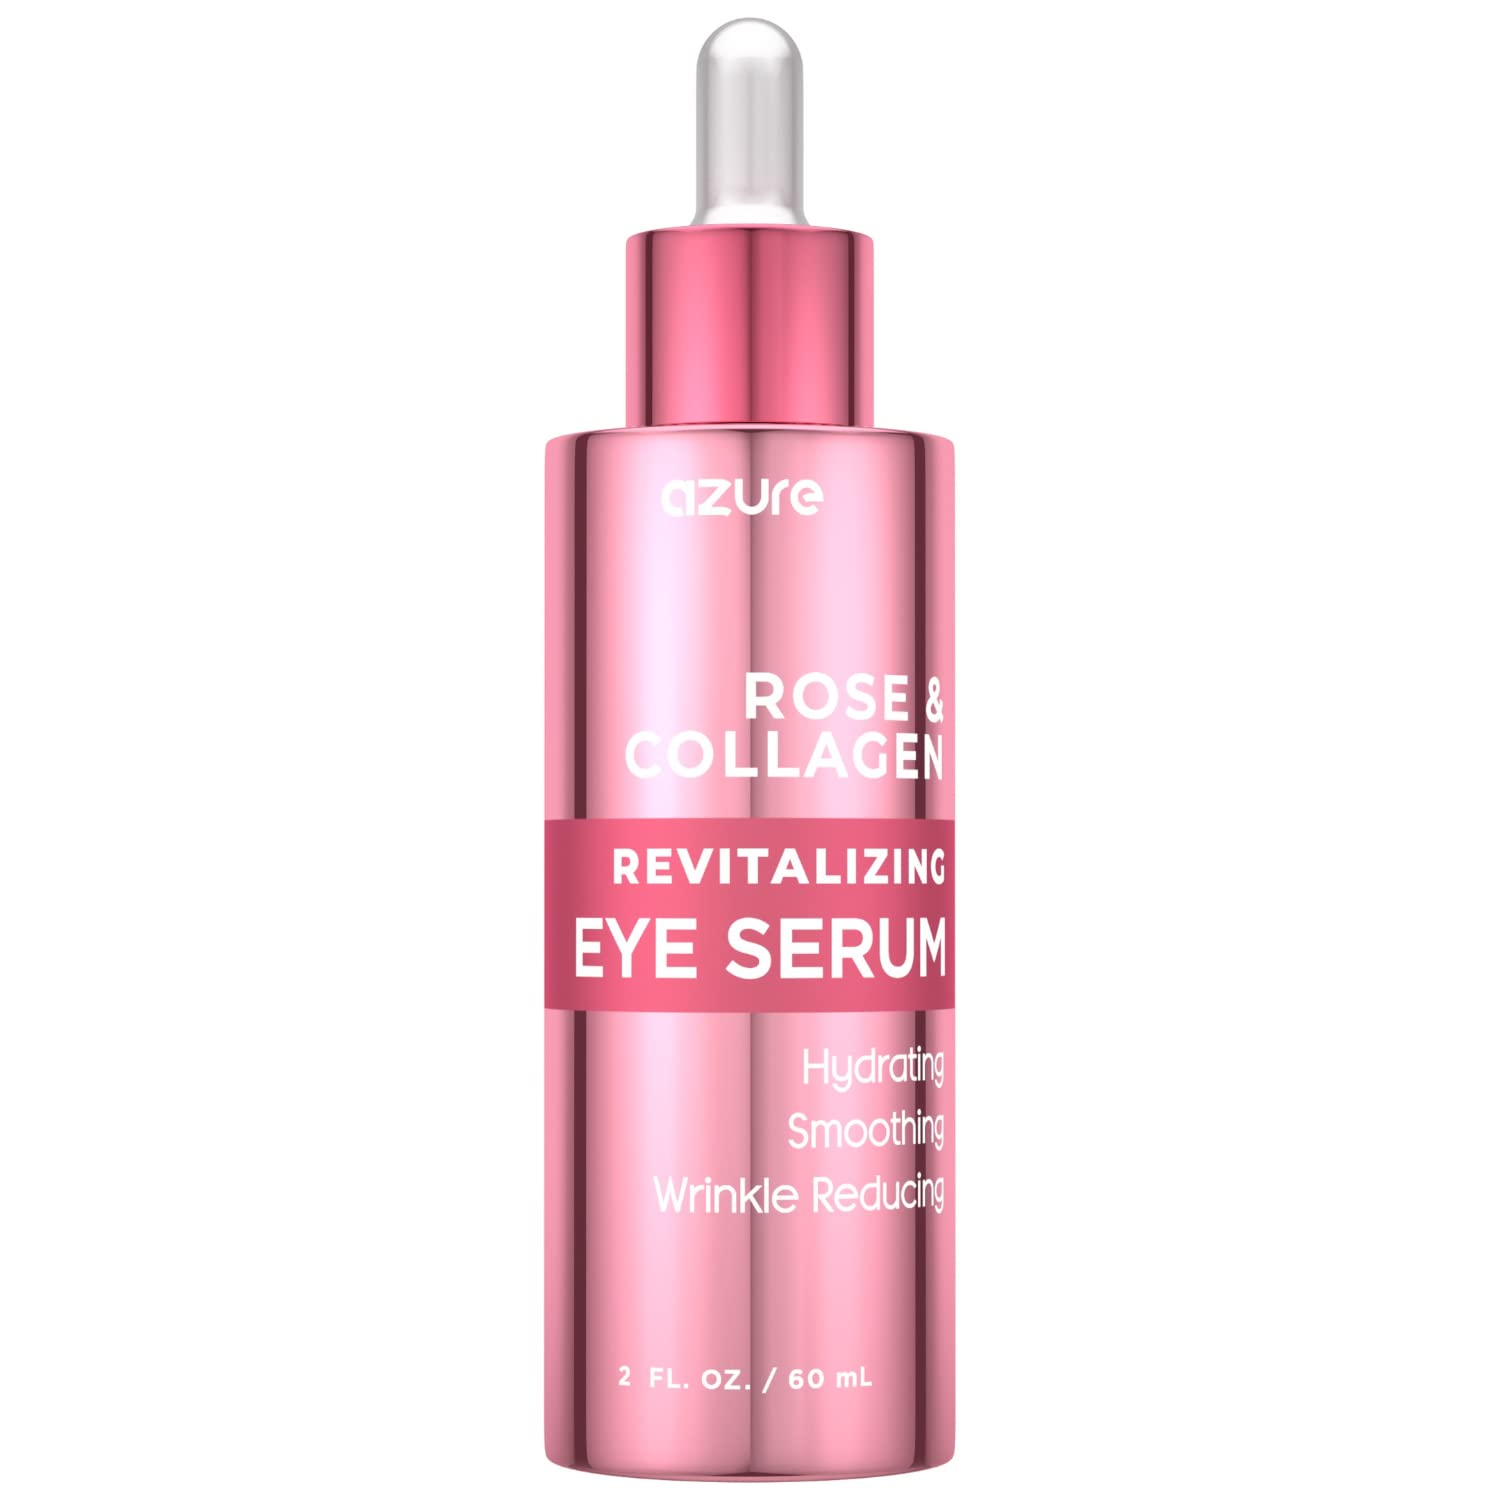 AZURE Rose & Collagen Revitalizing Eye Serum - Hydrating & Smoothing | Reduces Wrinkles, Fine Lines & Under Eye Bags | Minimize Signs of Aging | Made in Korea - 60mL